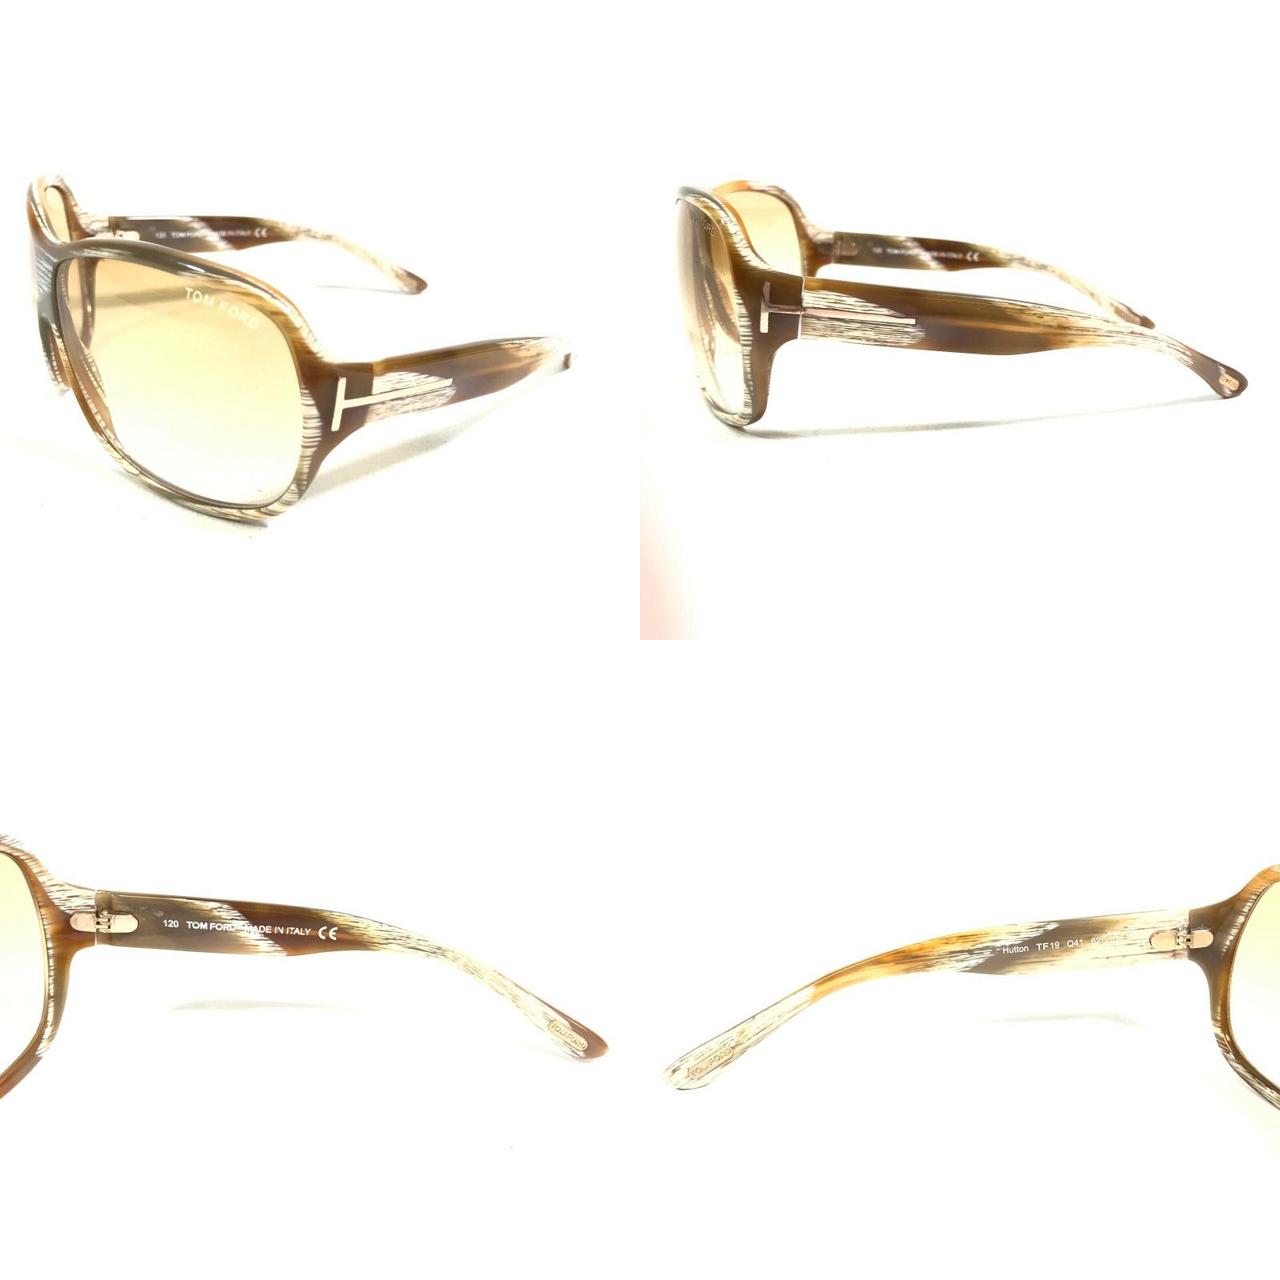 TOM FORD Women's White and Brown Sunglasses (4)